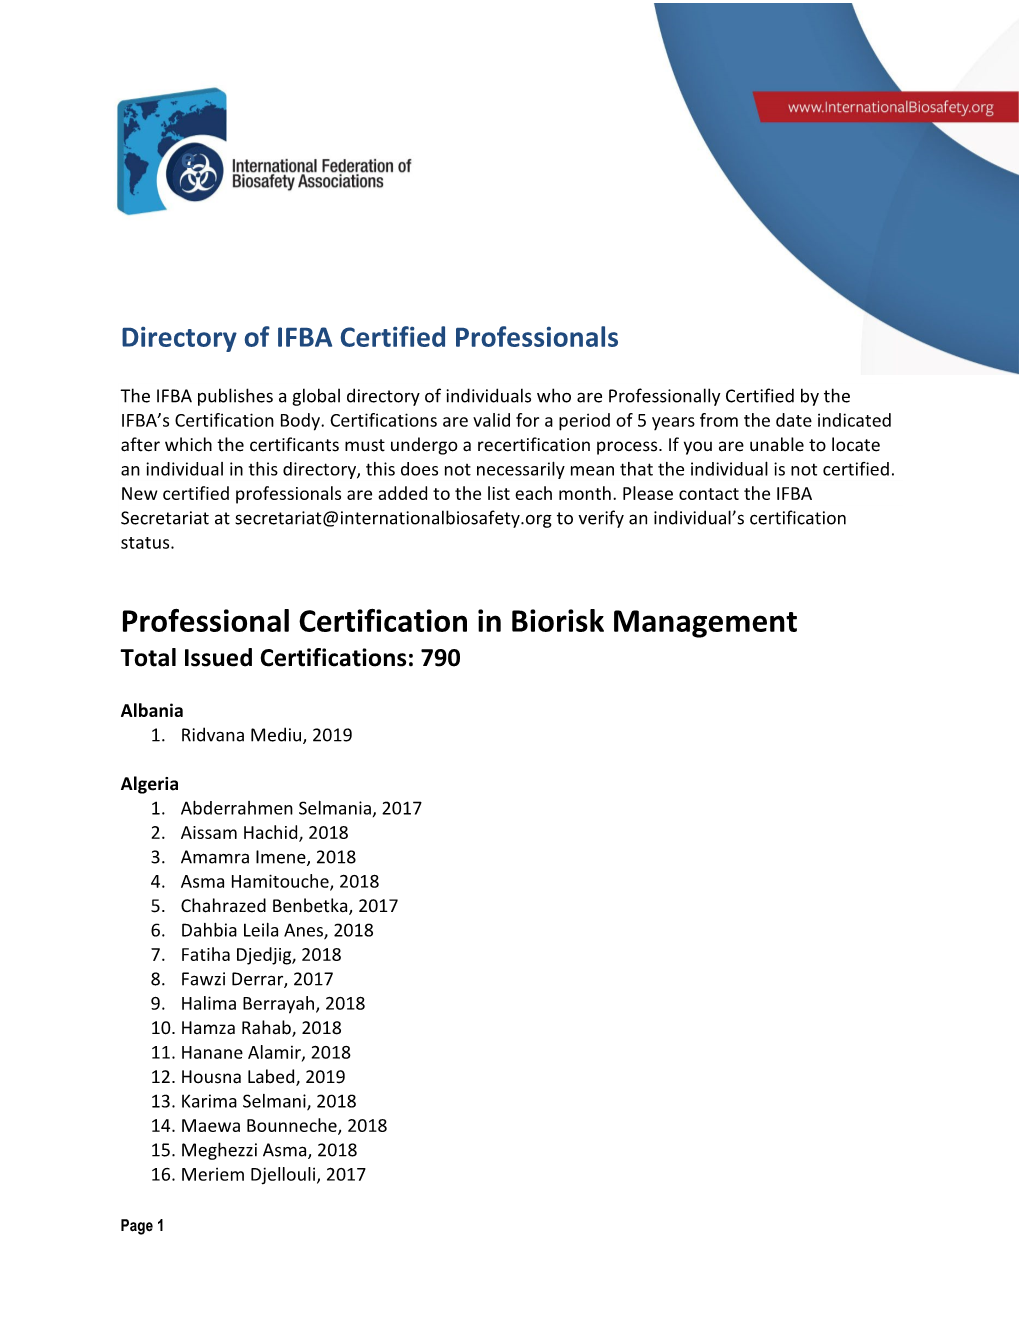 Professional Certification in Biorisk Management Total Issued Certifications: 790